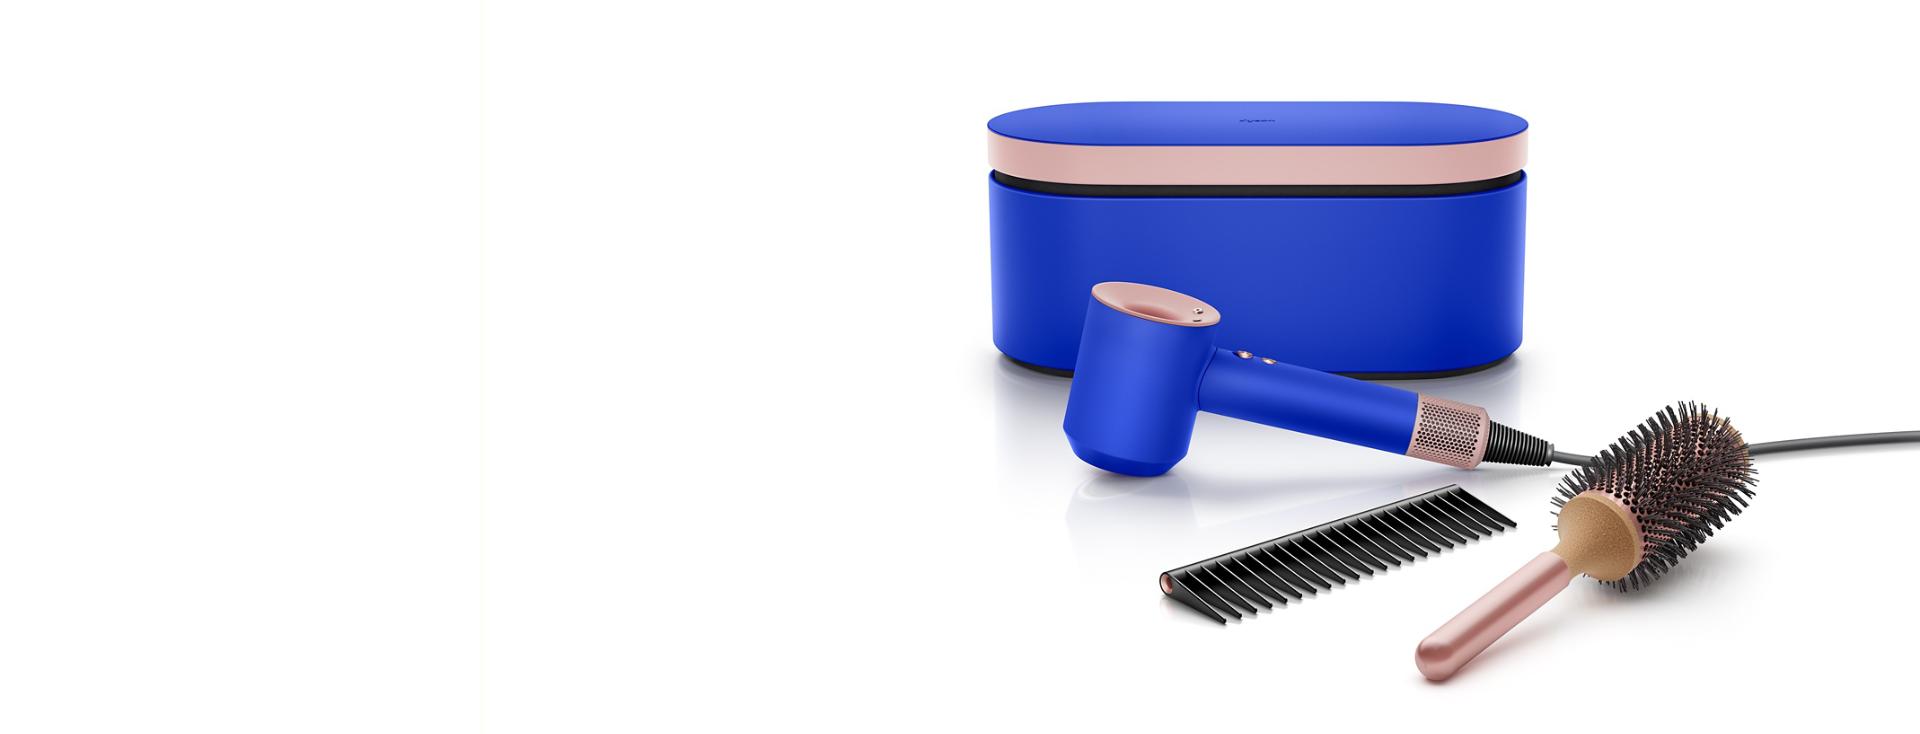 Dyson Supersonic hair dryer with Presentation case and accessories